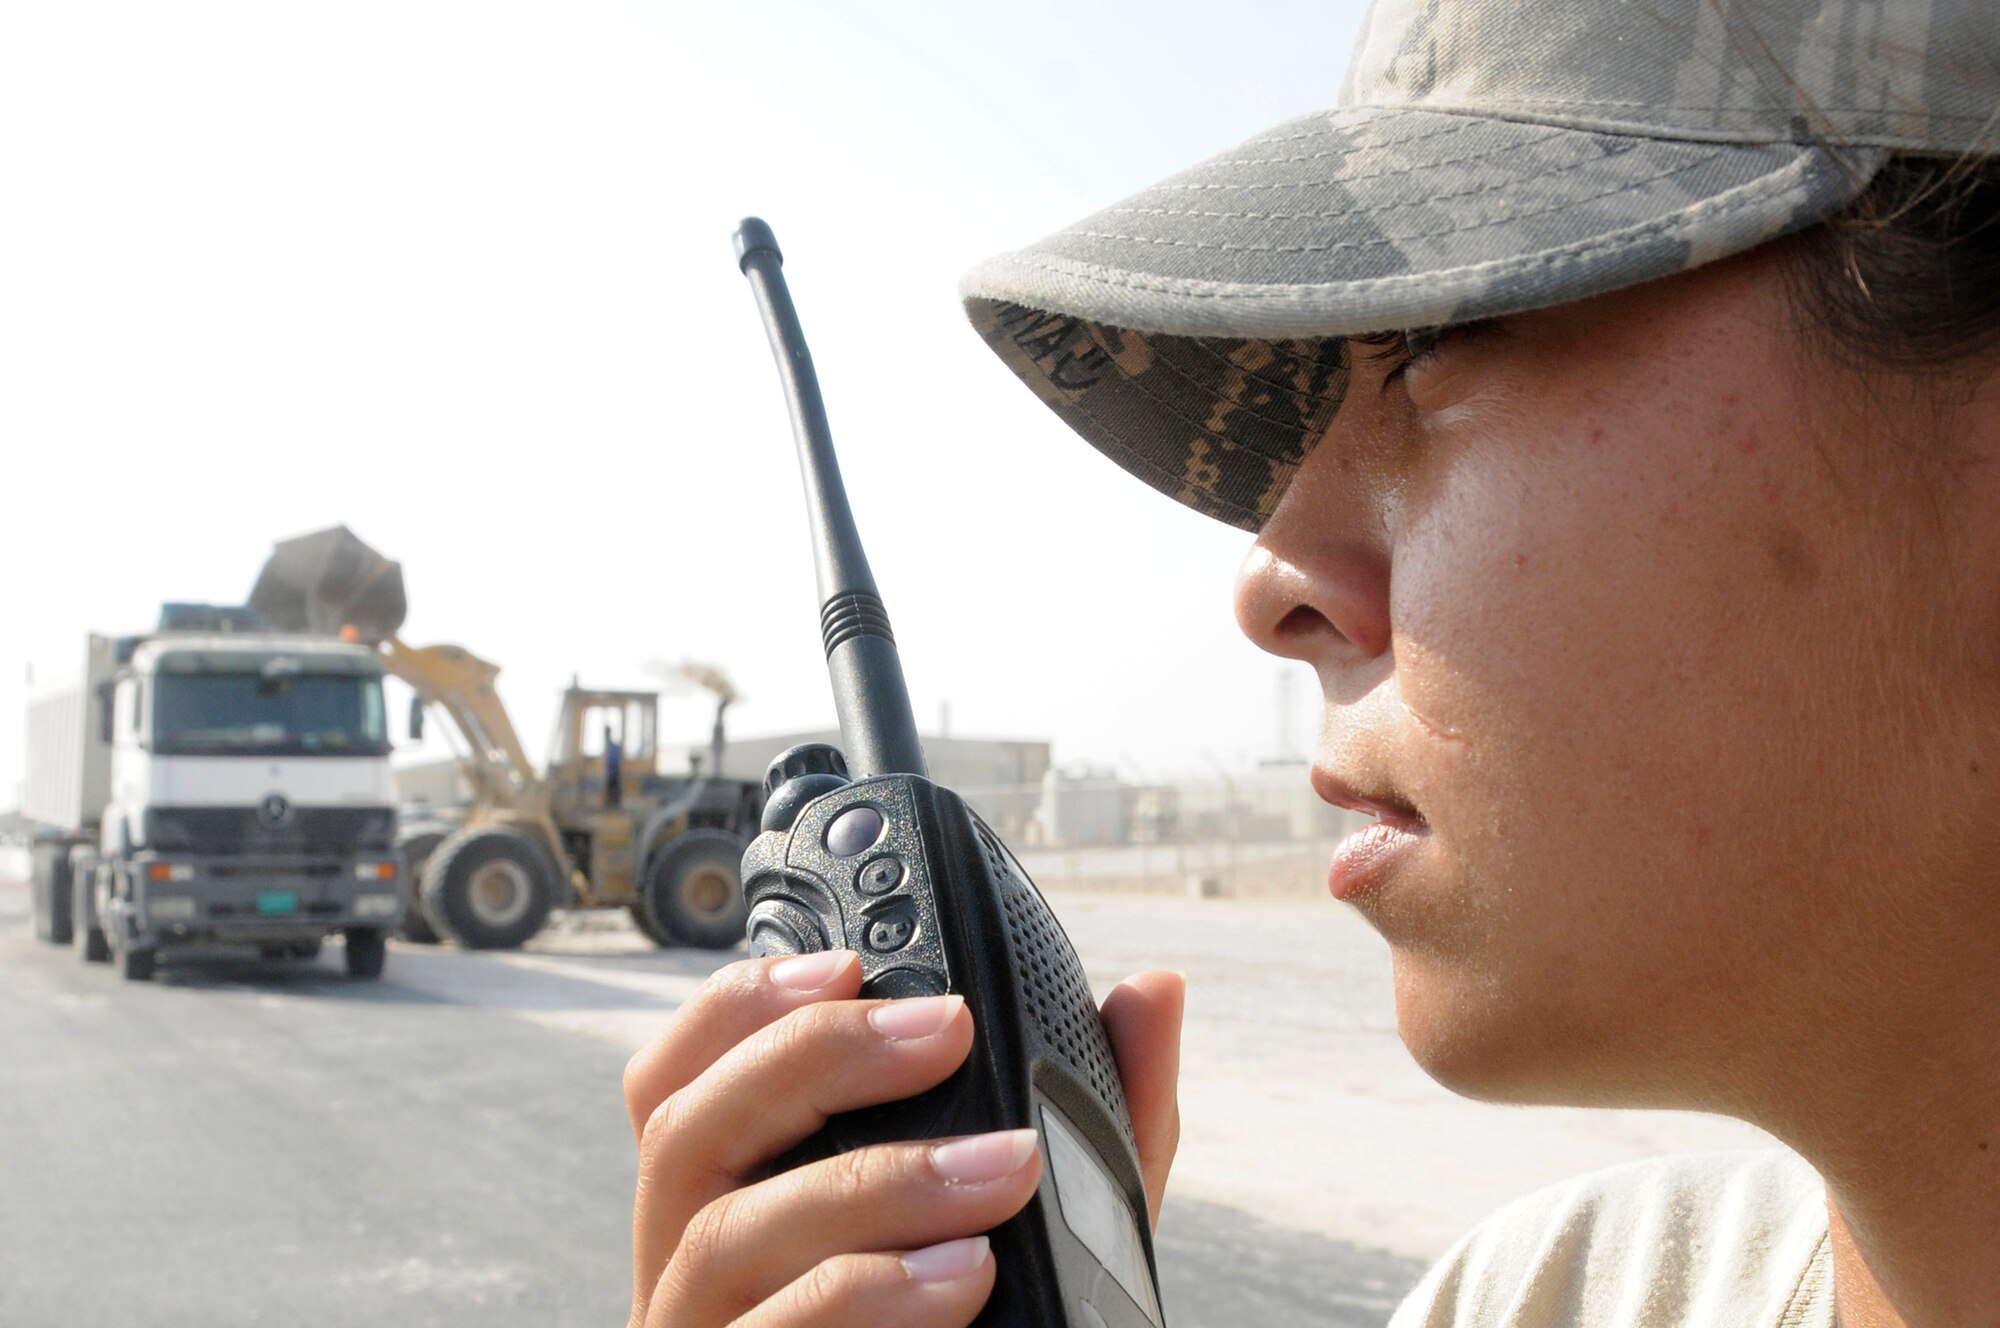 Senior Airman Brenna Reynolds, escort assigned to the 379th Expeditionary Civil Engineer Squadron, uses her radio to call in for accountability Nov. 13, at an undisclosed air base in Southwest Asia. The 379 ECES escort members stay vigilant to ensure third country national contractors here complete their jobs and don?t perform any acts that would endanger deployed members. Airman Reynolds, a native of Van Horn, Texas, is deployed from Shaw Air Force Base, S.C., in support of Operations Iraqi and Enduring Freedom and Joint Task Force-Horn of Africa. (U.S. Air Force photo by Staff Sgt. Darnell T. Cannady/Released)